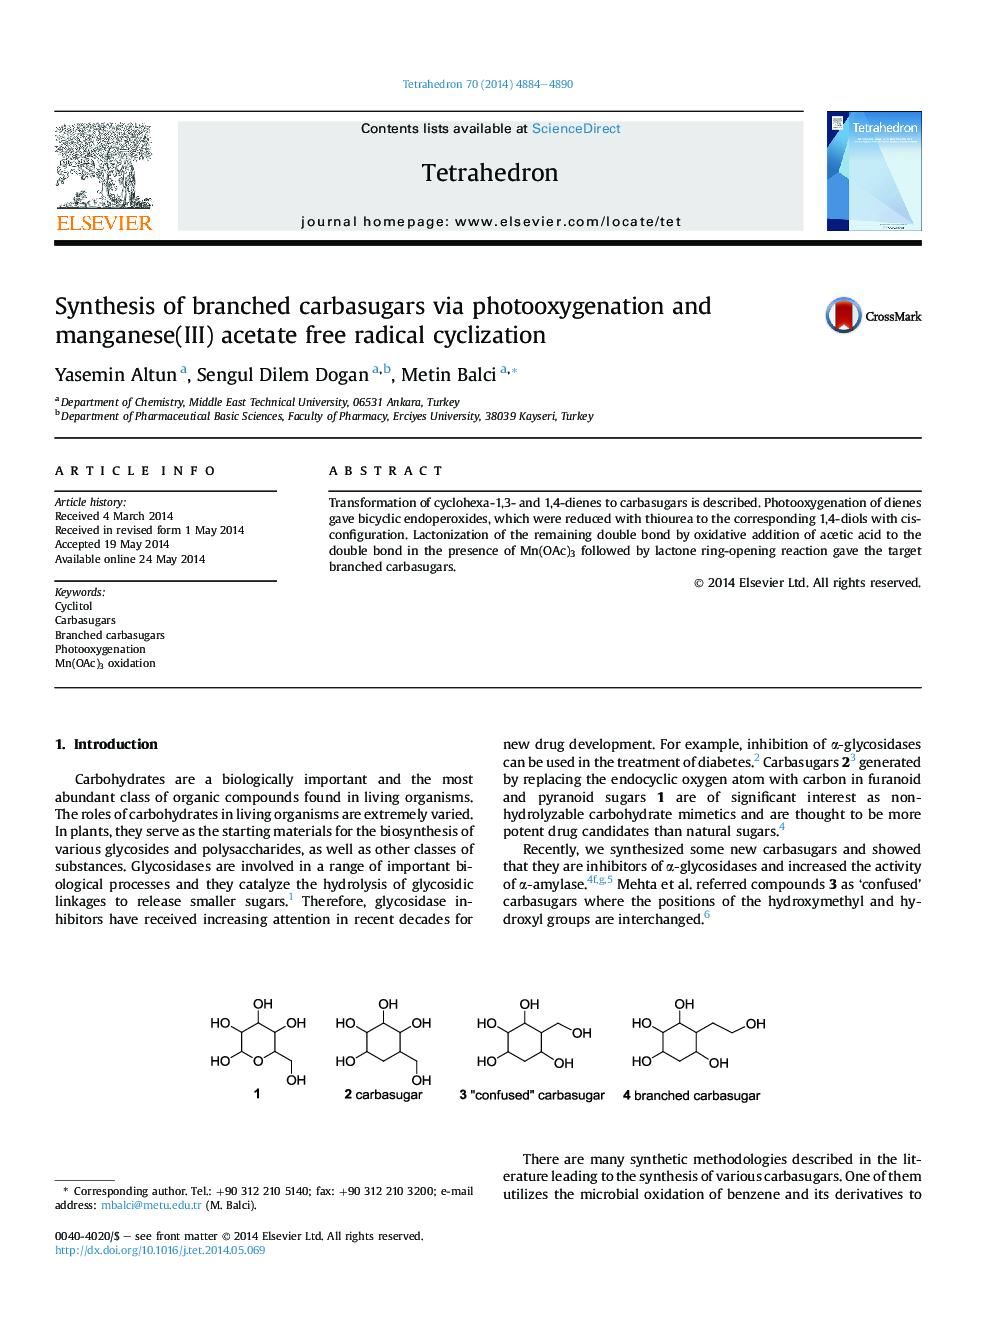 Synthesis of branched carbasugars via photooxygenation and manganese(III) acetate free radical cyclization